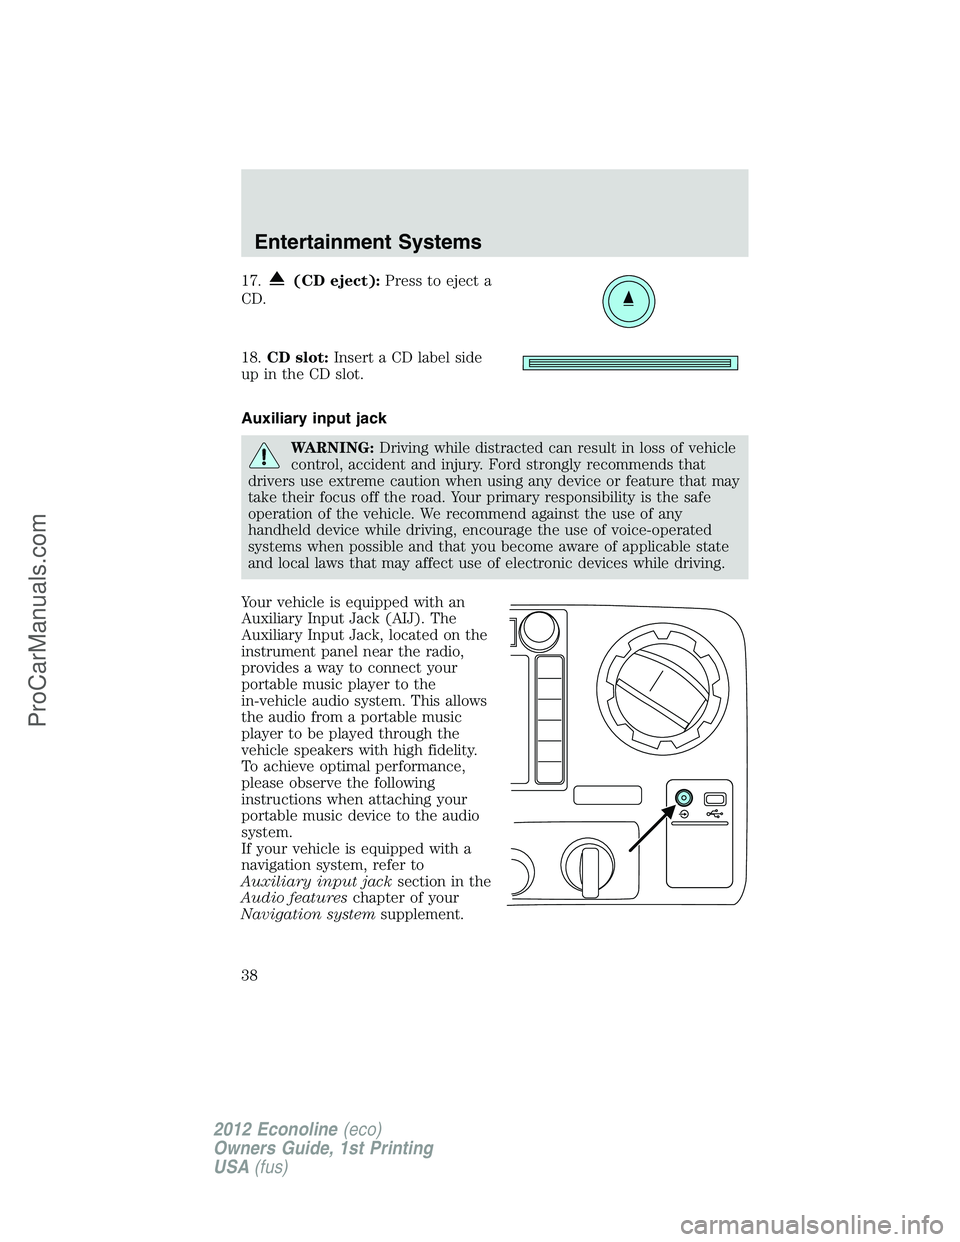 FORD E-250 2012  Owners Manual 17.(CD eject):Press to eject a
CD.
18.CD slot:Insert a CD label side
up in the CD slot.
Auxiliary input jack
WARNING:Driving while distracted can result in loss of vehicle
control, accident and injury